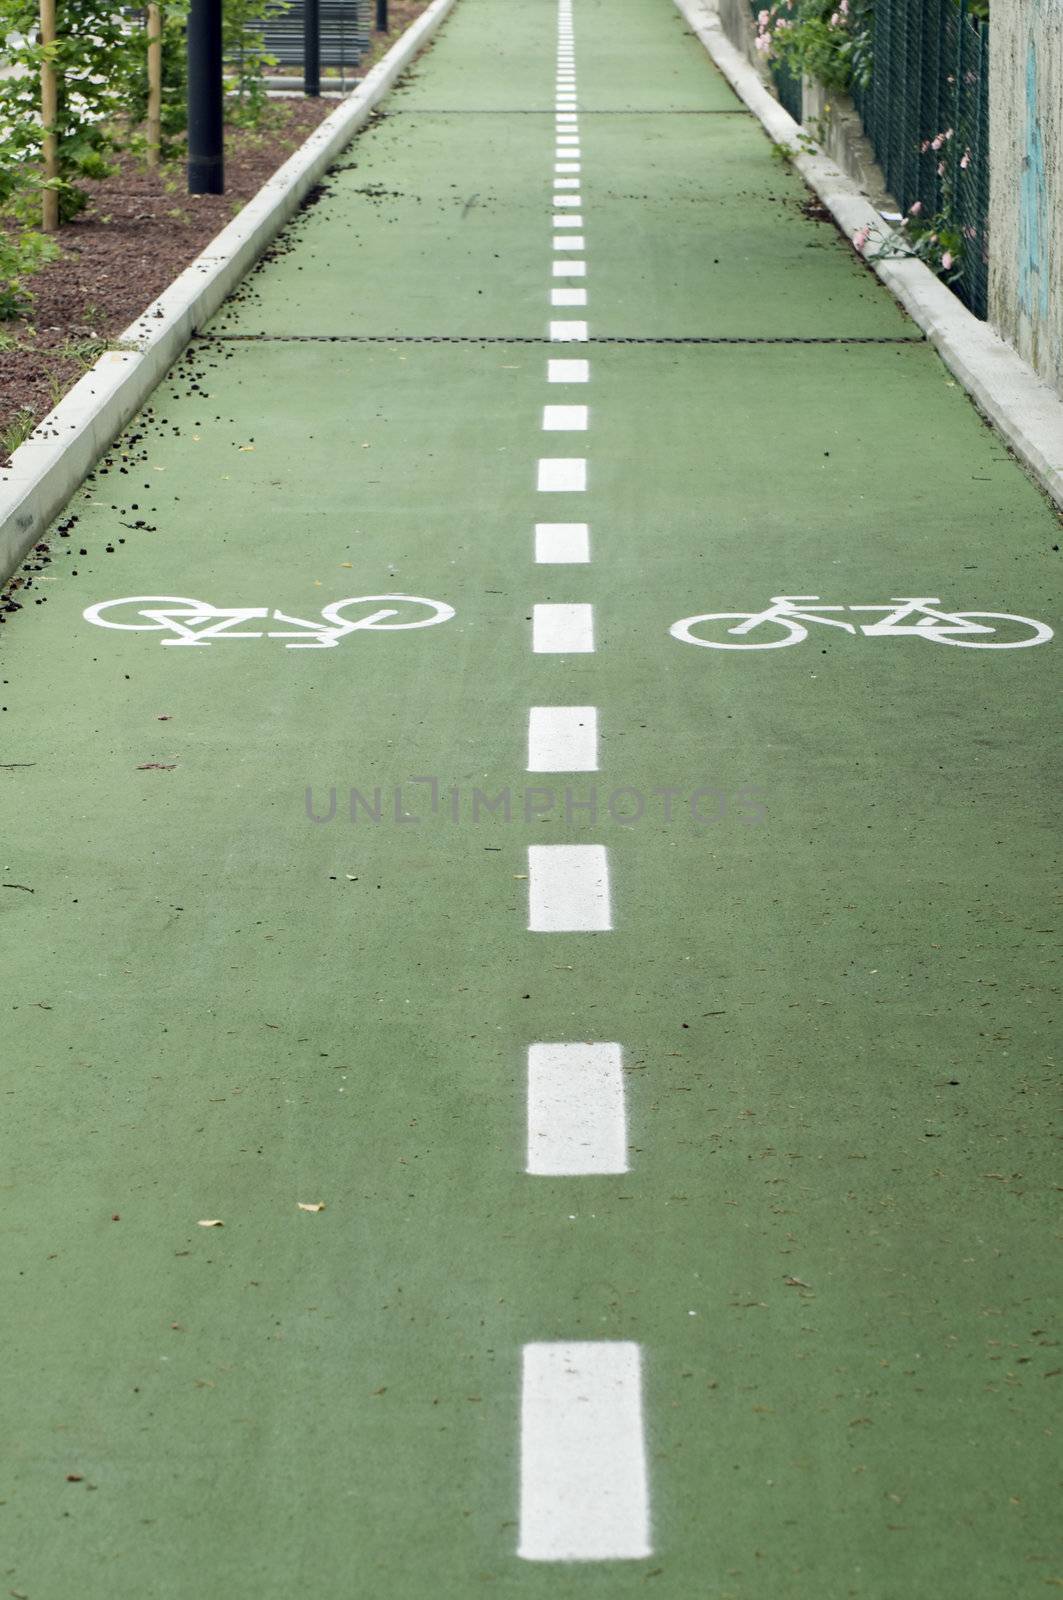 Bike road with two lanes diveded by dotted line